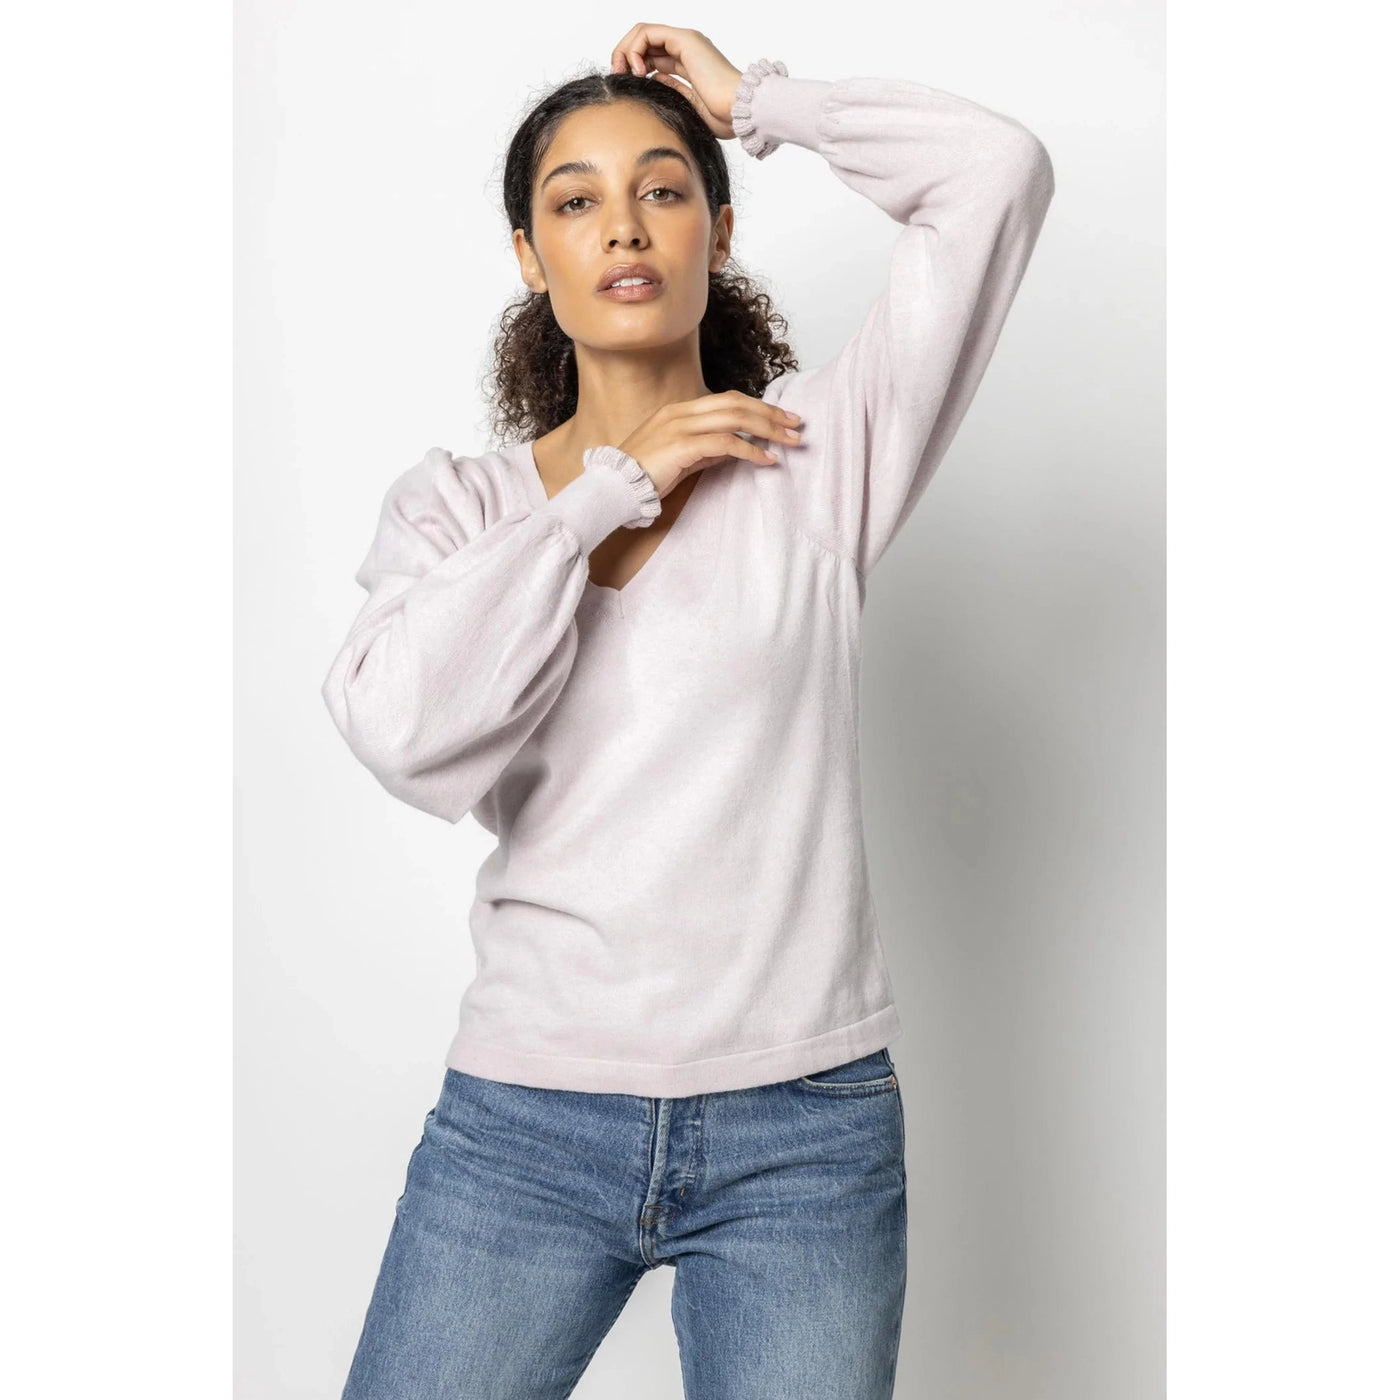 Puff Sleeve V-Neck Sweater-Women's Clothing-Lilac-XS-Kevin's Fine Outdoor Gear & Apparel